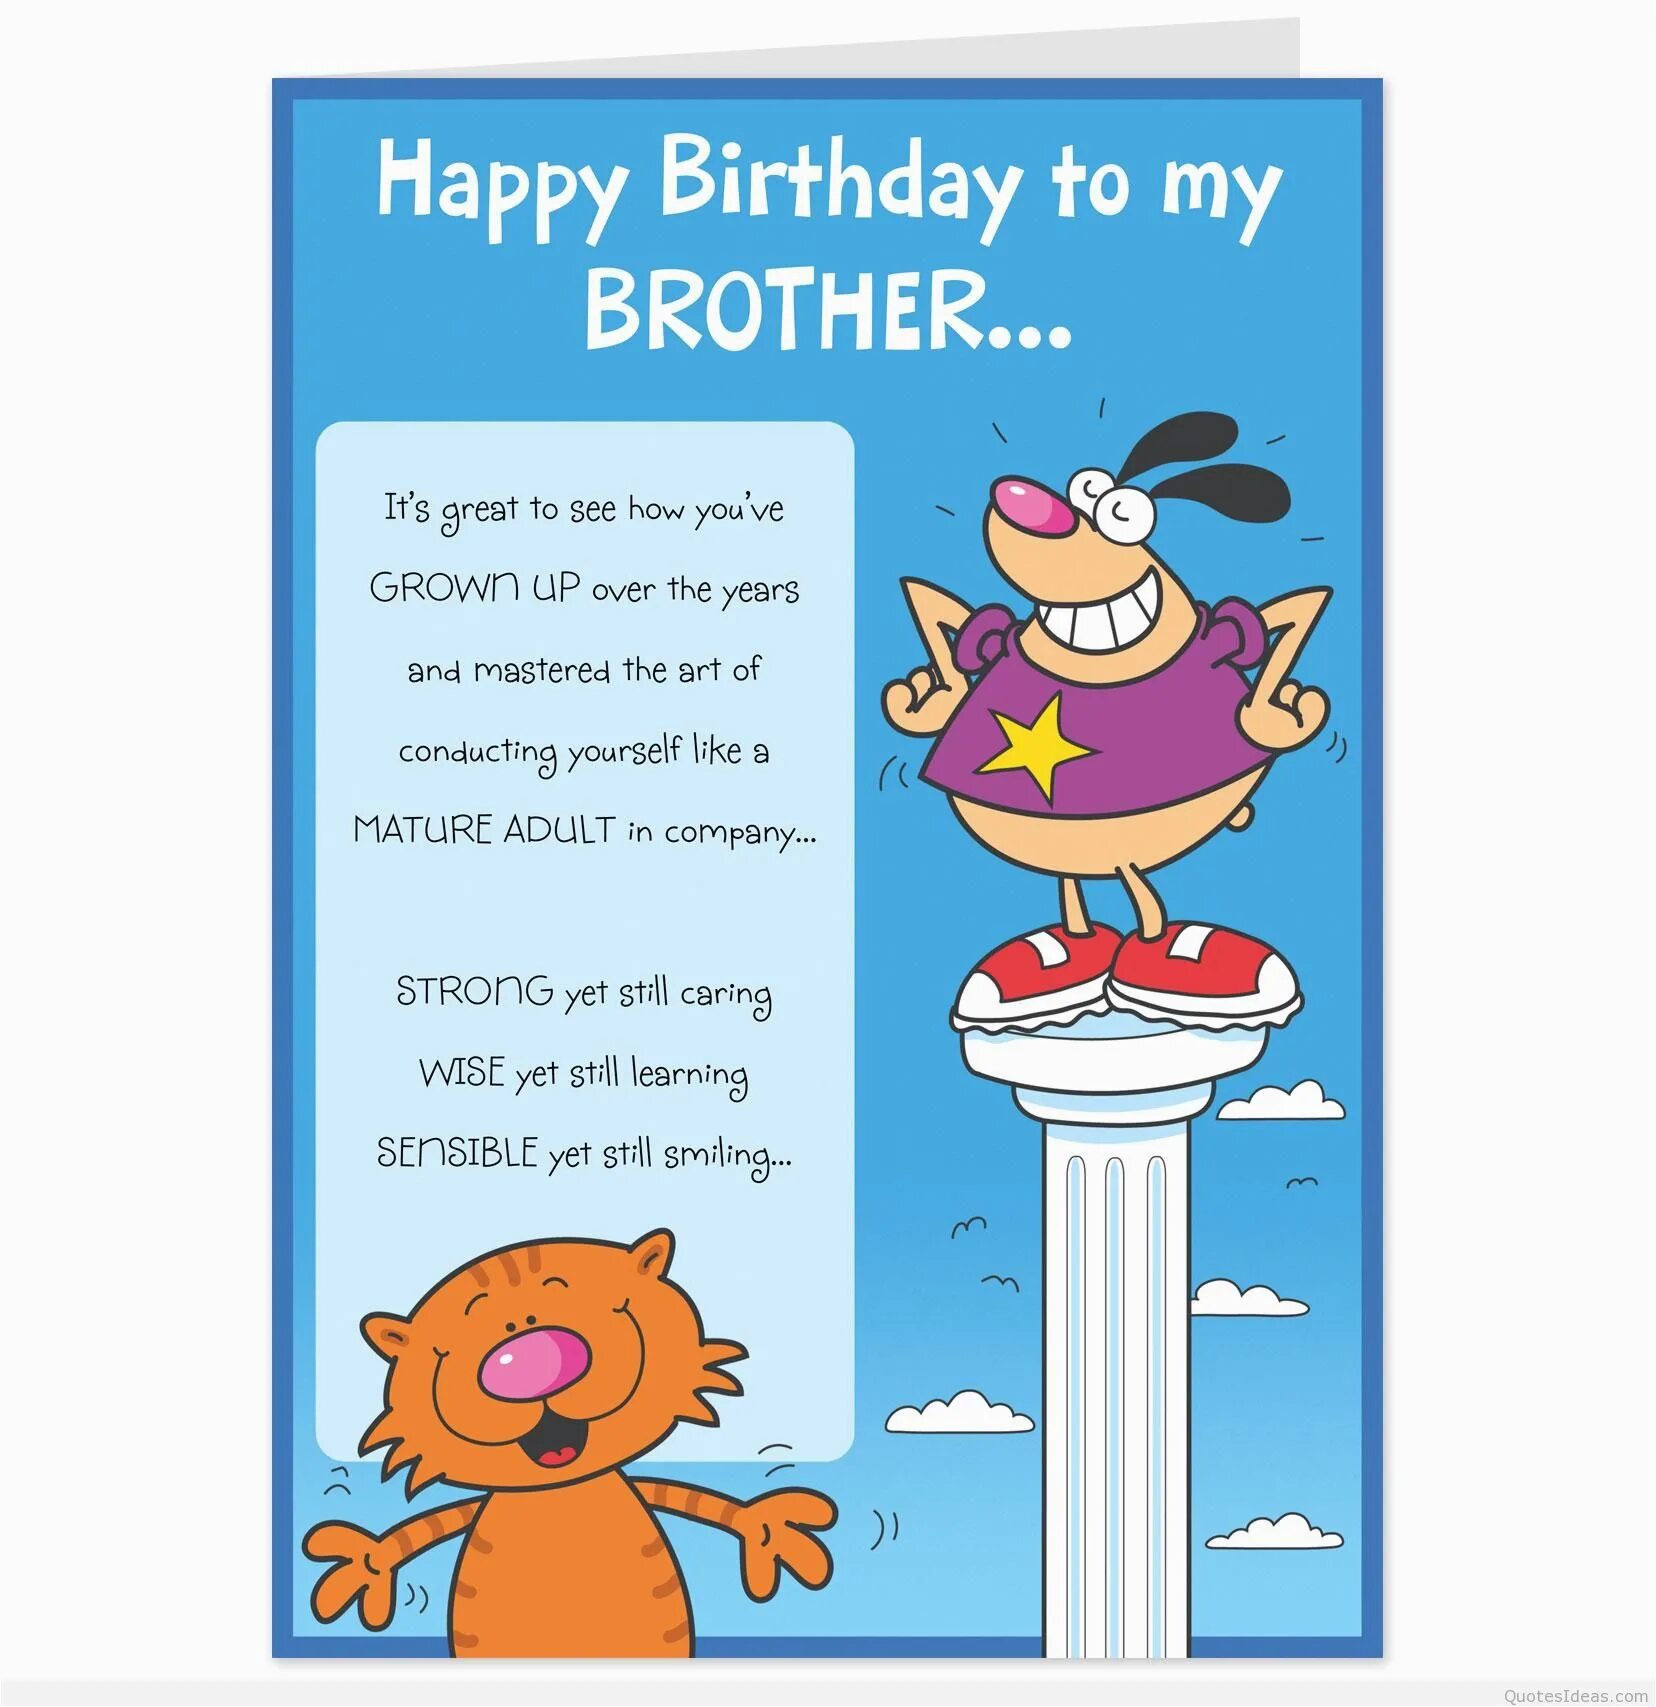 Happy Birthday Wishes for brother. Happy Birthday to you brother. Happy Birthday брат. Happy Birthday Cards brother.